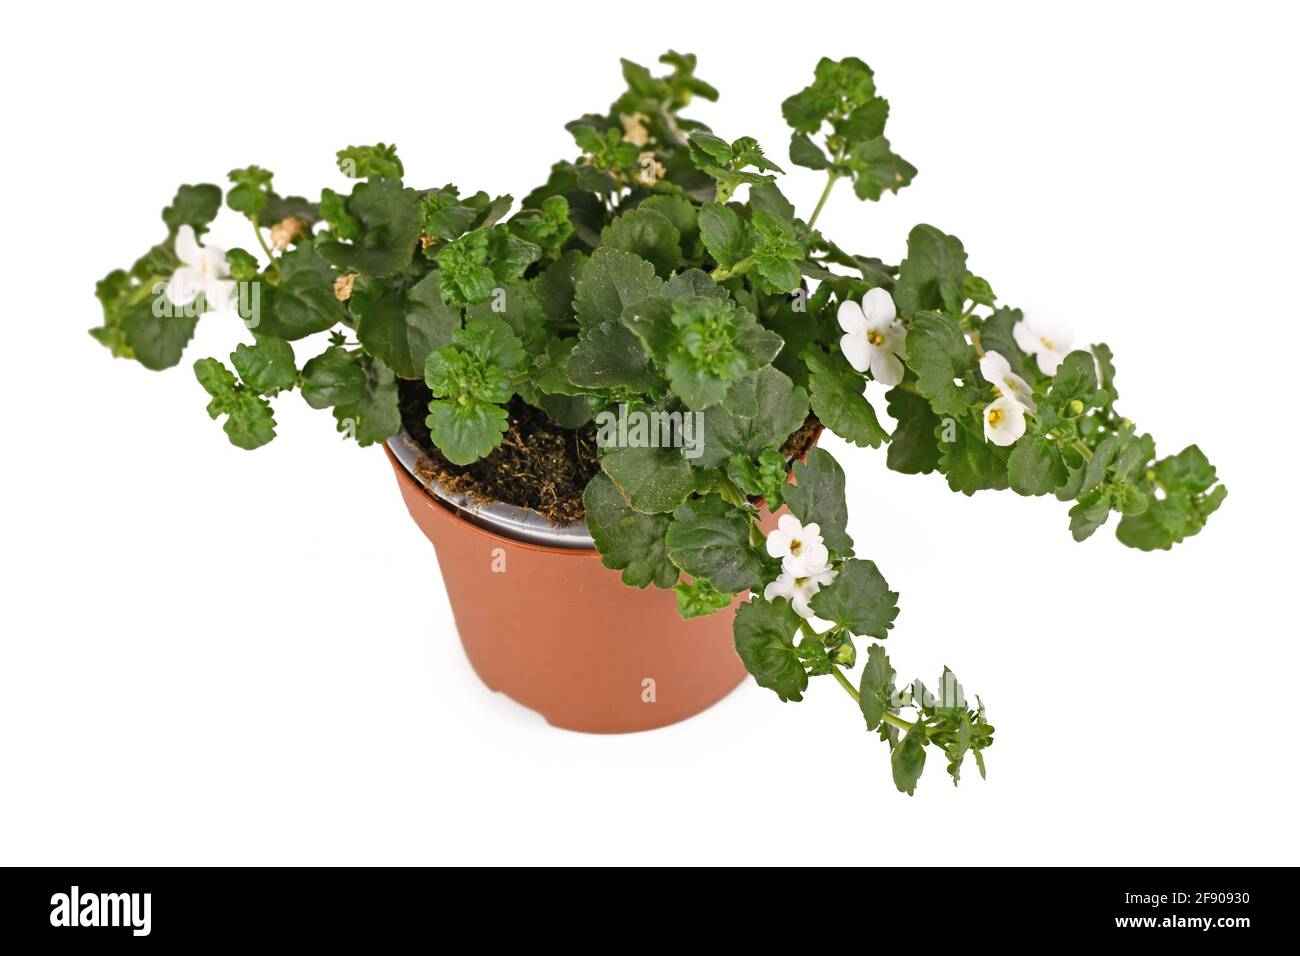 Small perennial flowering 'Sutera Cordata' plant with white blooming flowers in flower pot isolated on white background Stock Photo